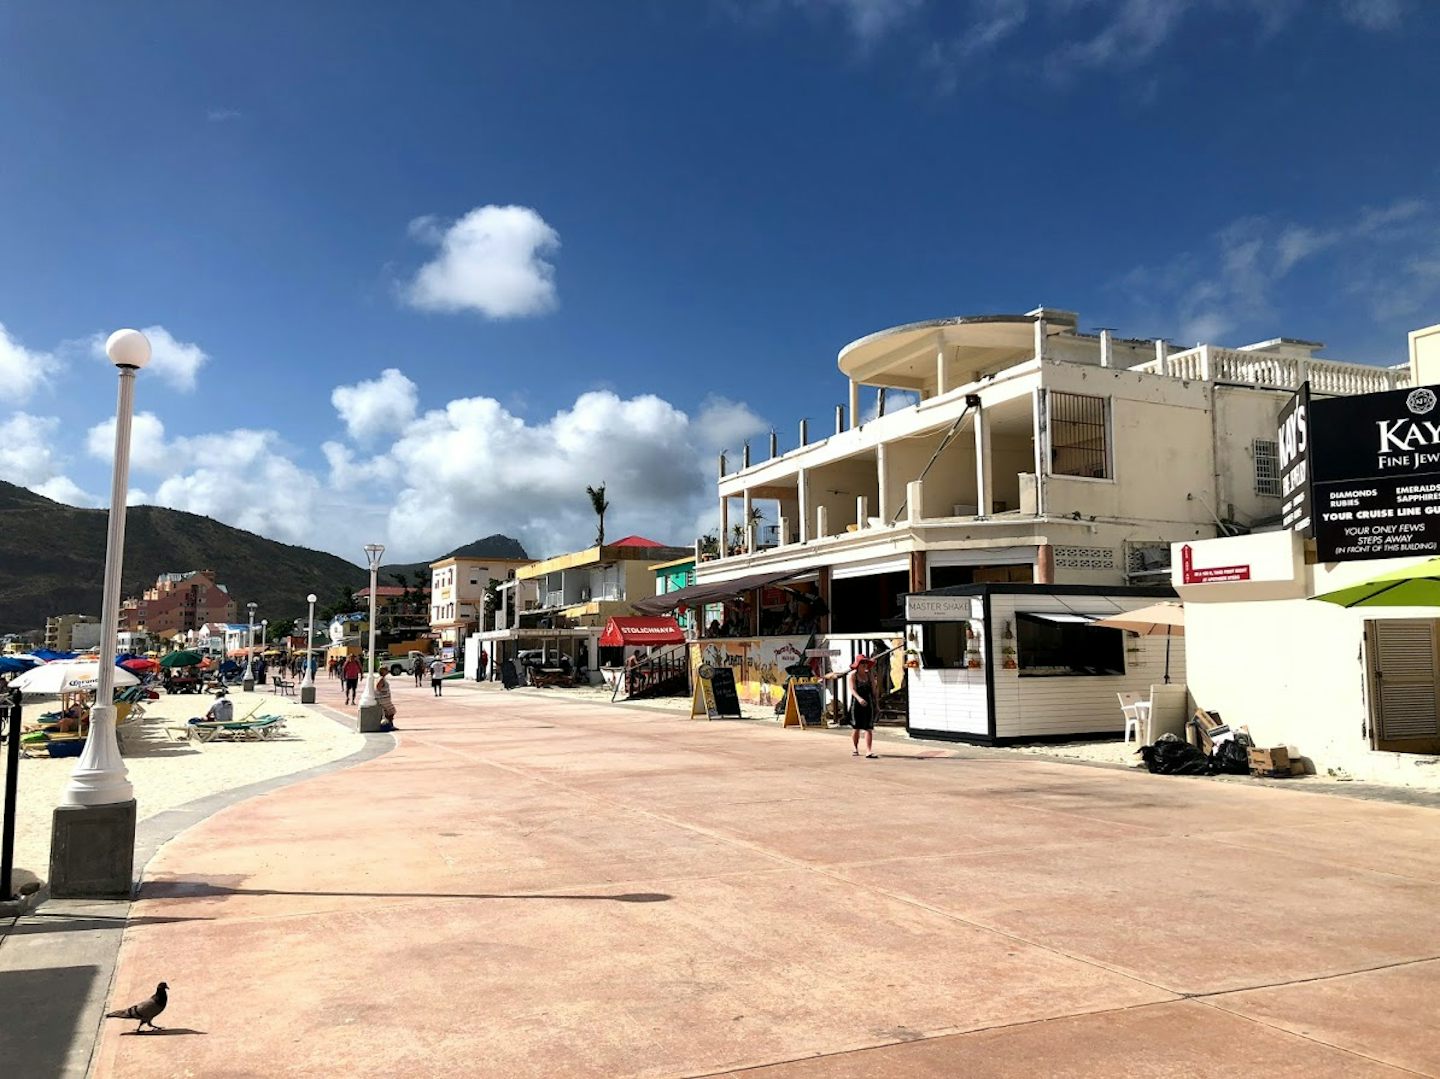 St. Maarten is still rebuilding - this is the town centre by the main beach